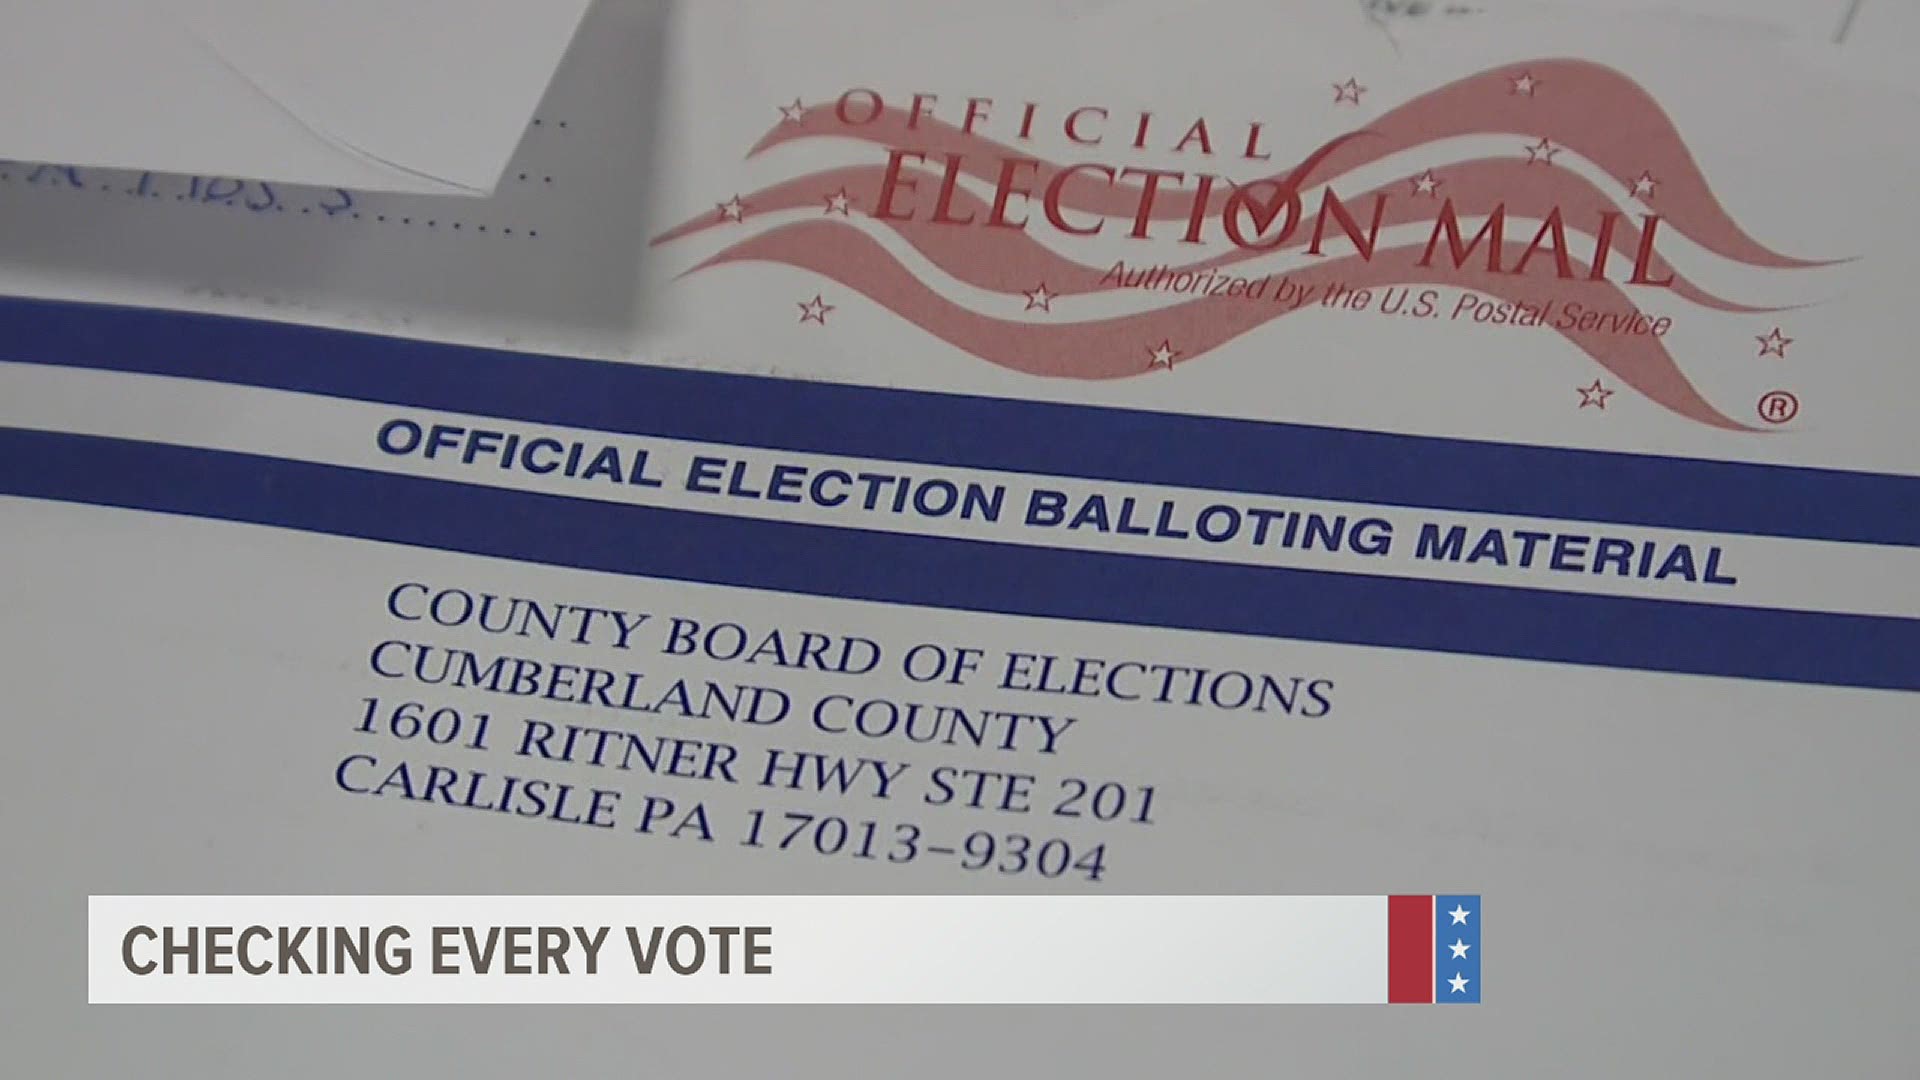 94,000 provisional ballots were issued statewide. Nearly 10,000 mail-ins were received between November 4-6